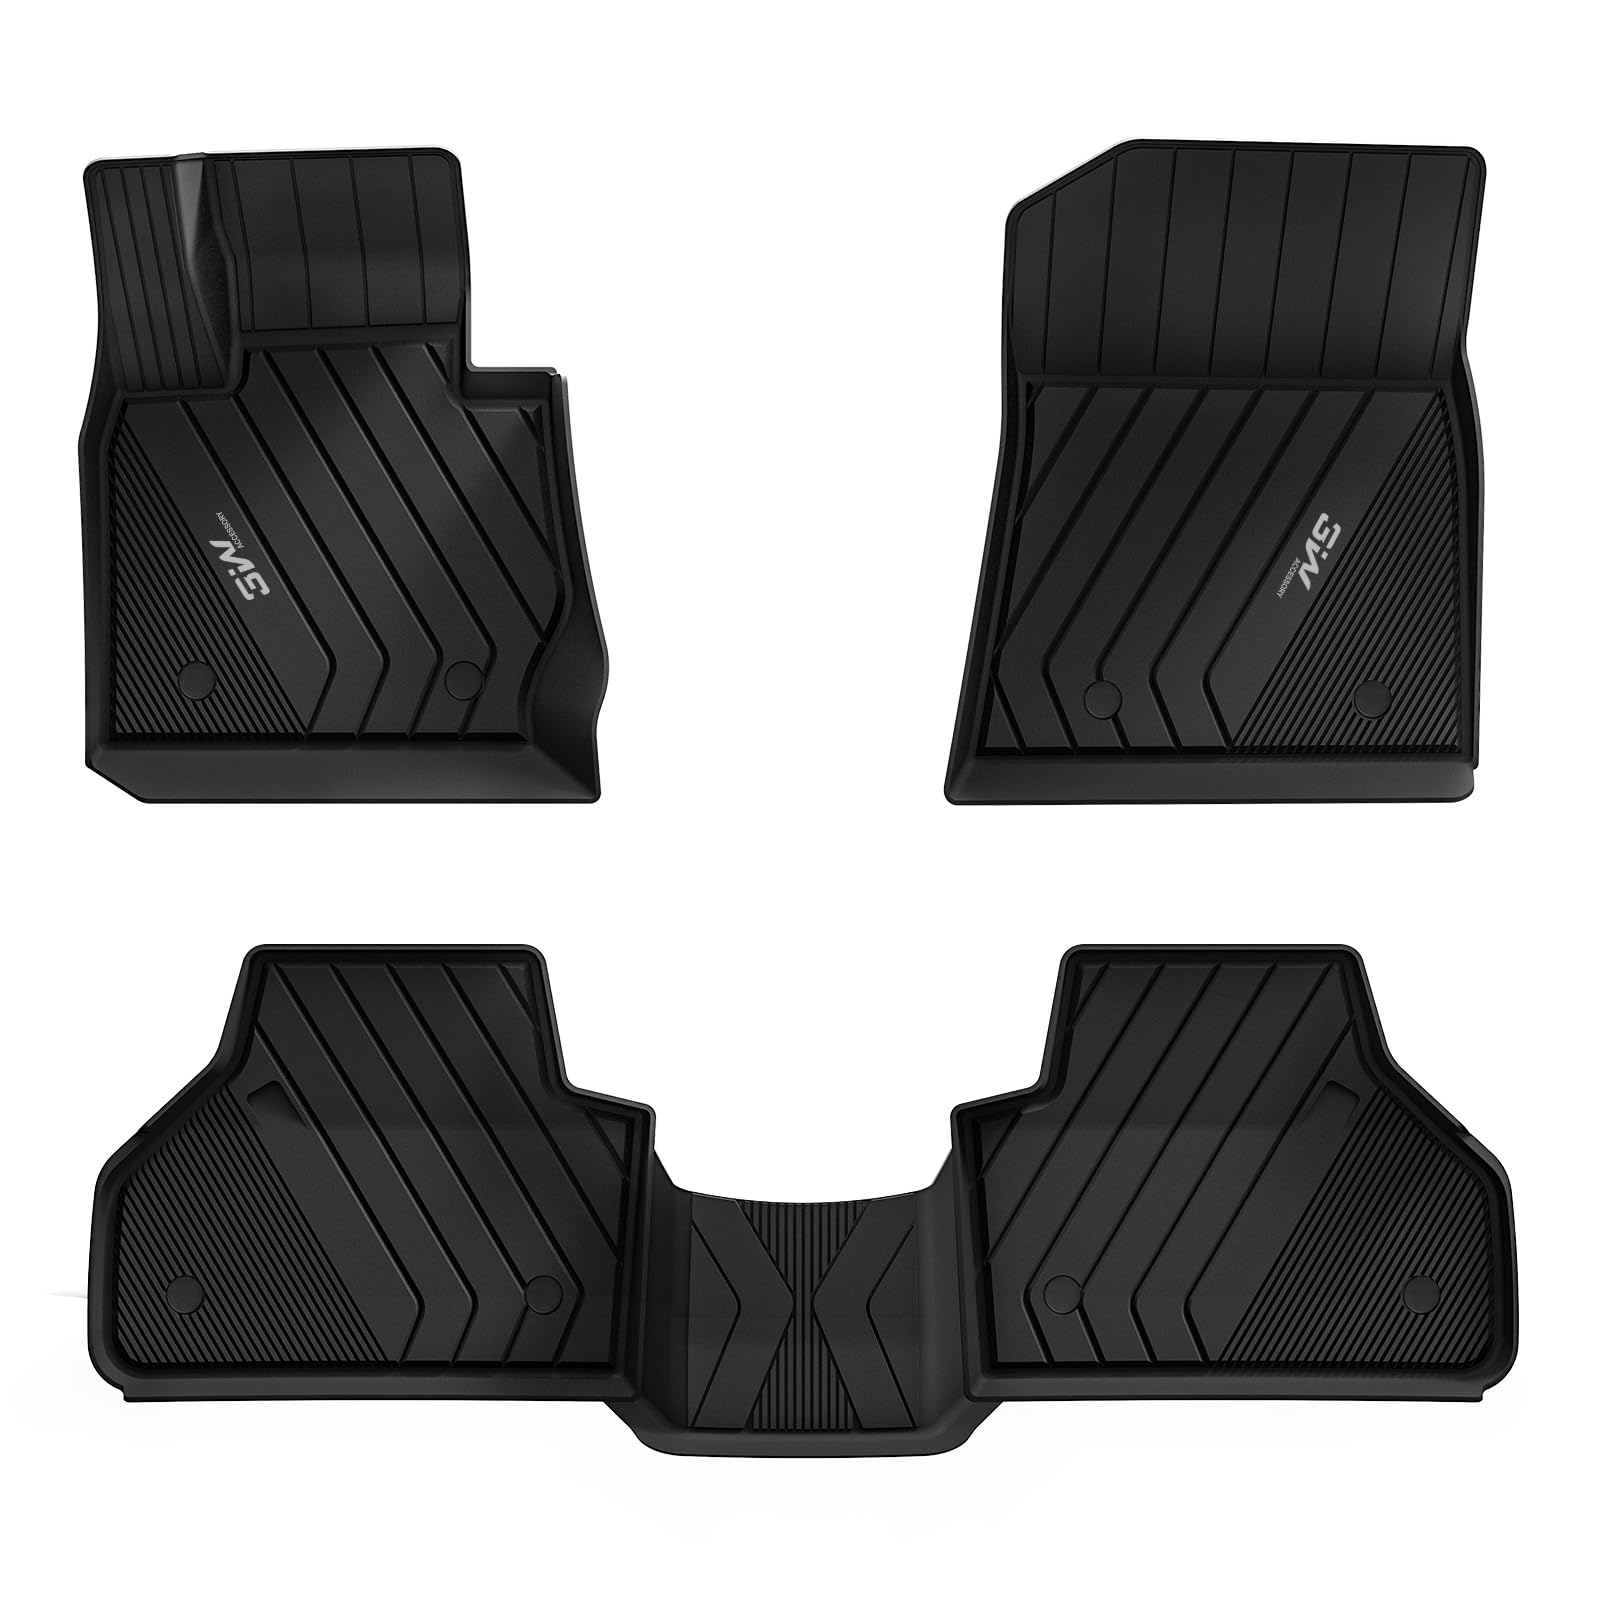 3W BMW X4 2015-2018 Custom Floor Mats TPE Material & All-Weather Protection Vehicles & Parts 3Wliners 2015-2018 X4 2015-2018 1st&2nd Row Mats